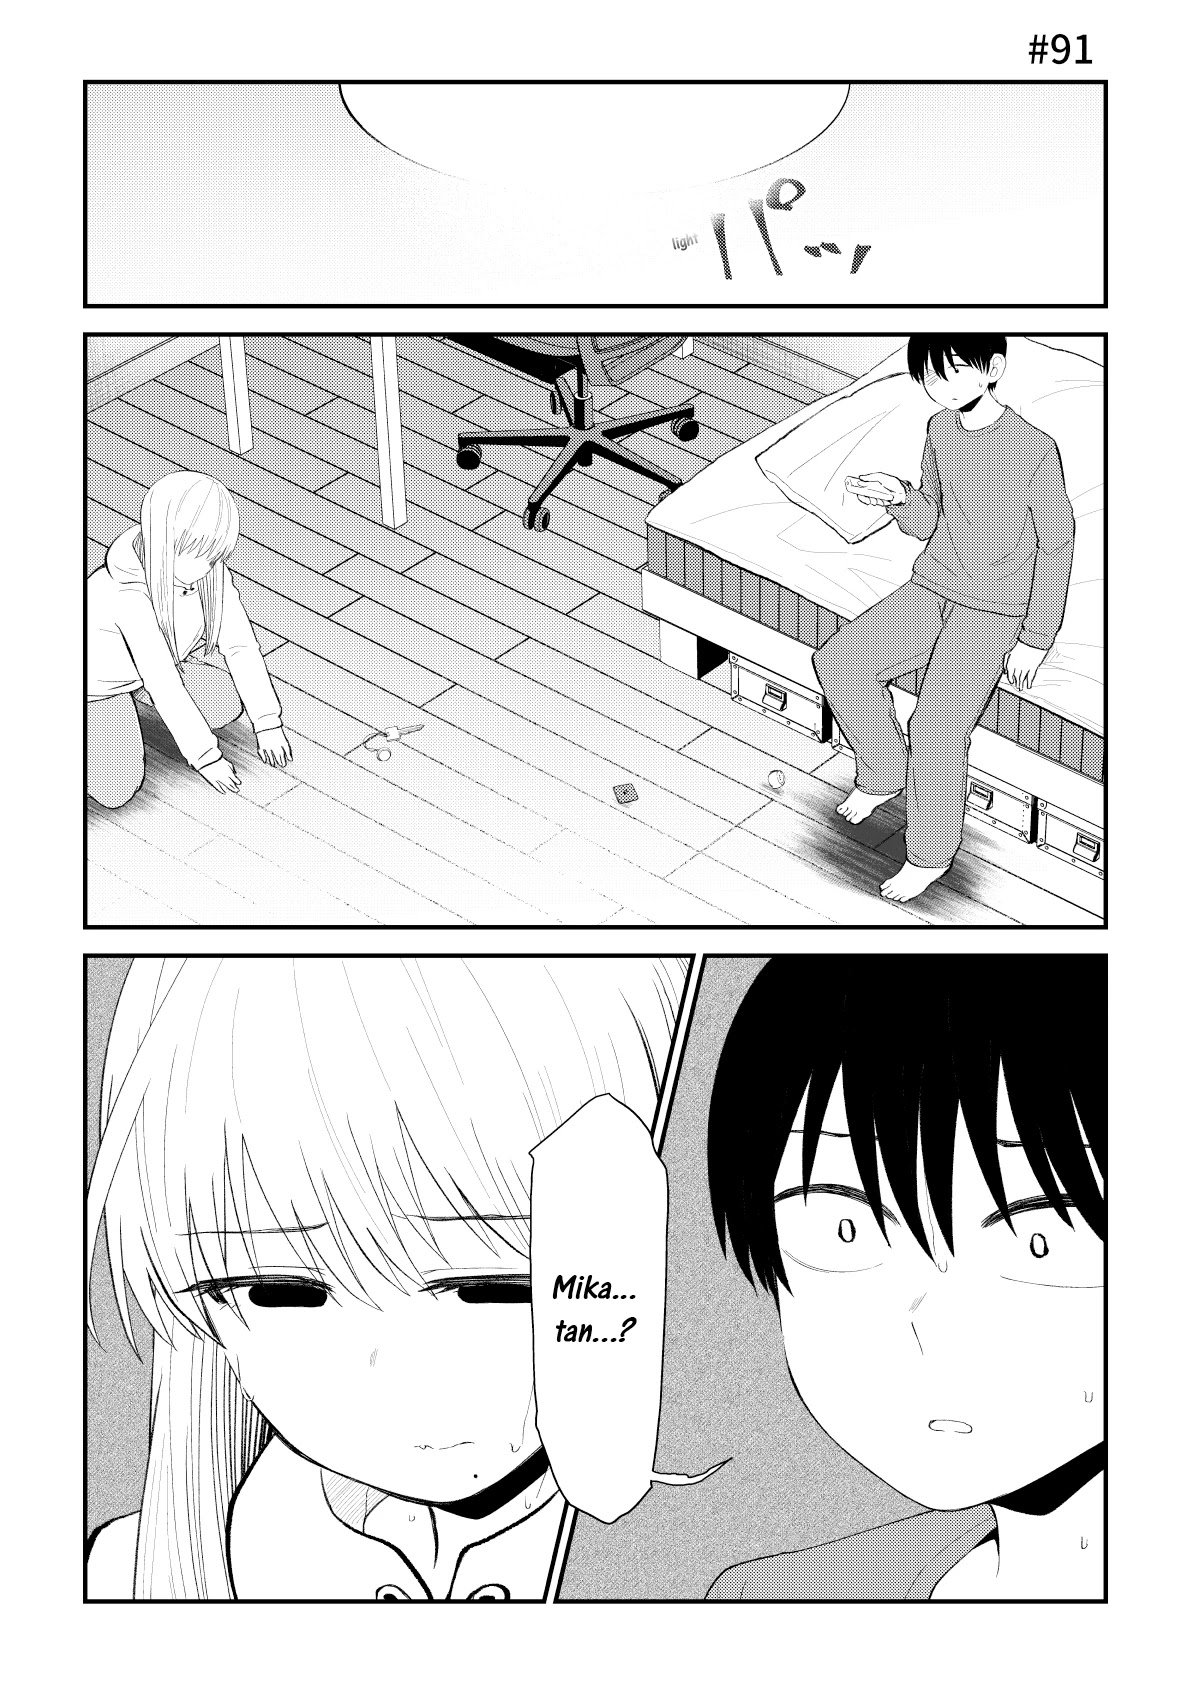 His Favorite Idol Moves in Next Door, the Romcom - chapter 91 - #1